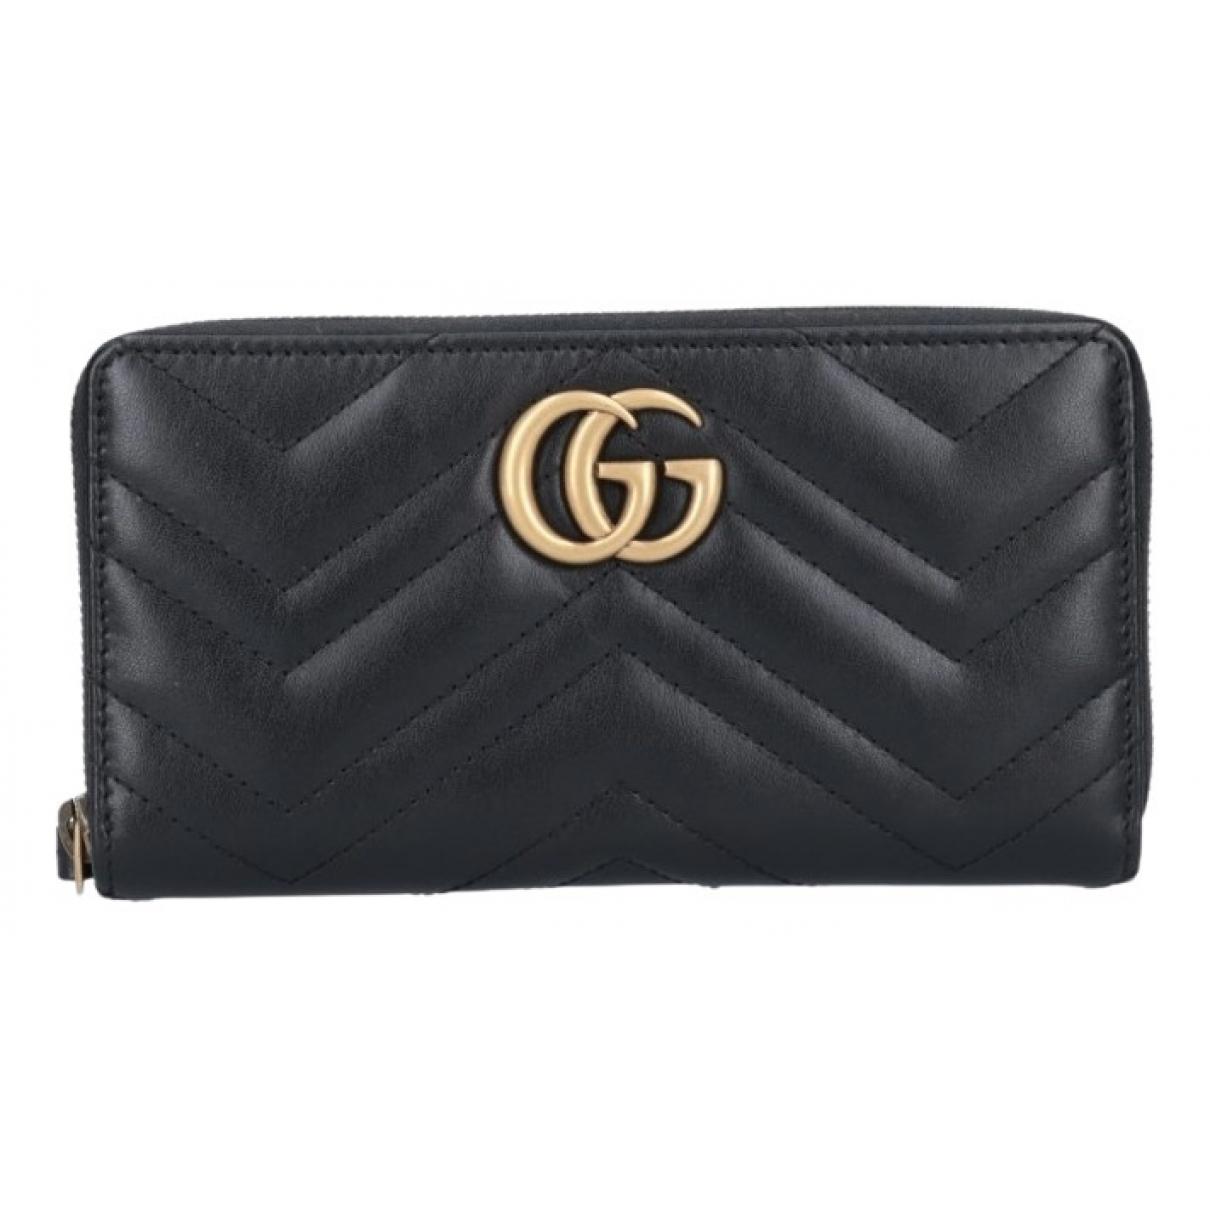 Marmont leather wallet - 1